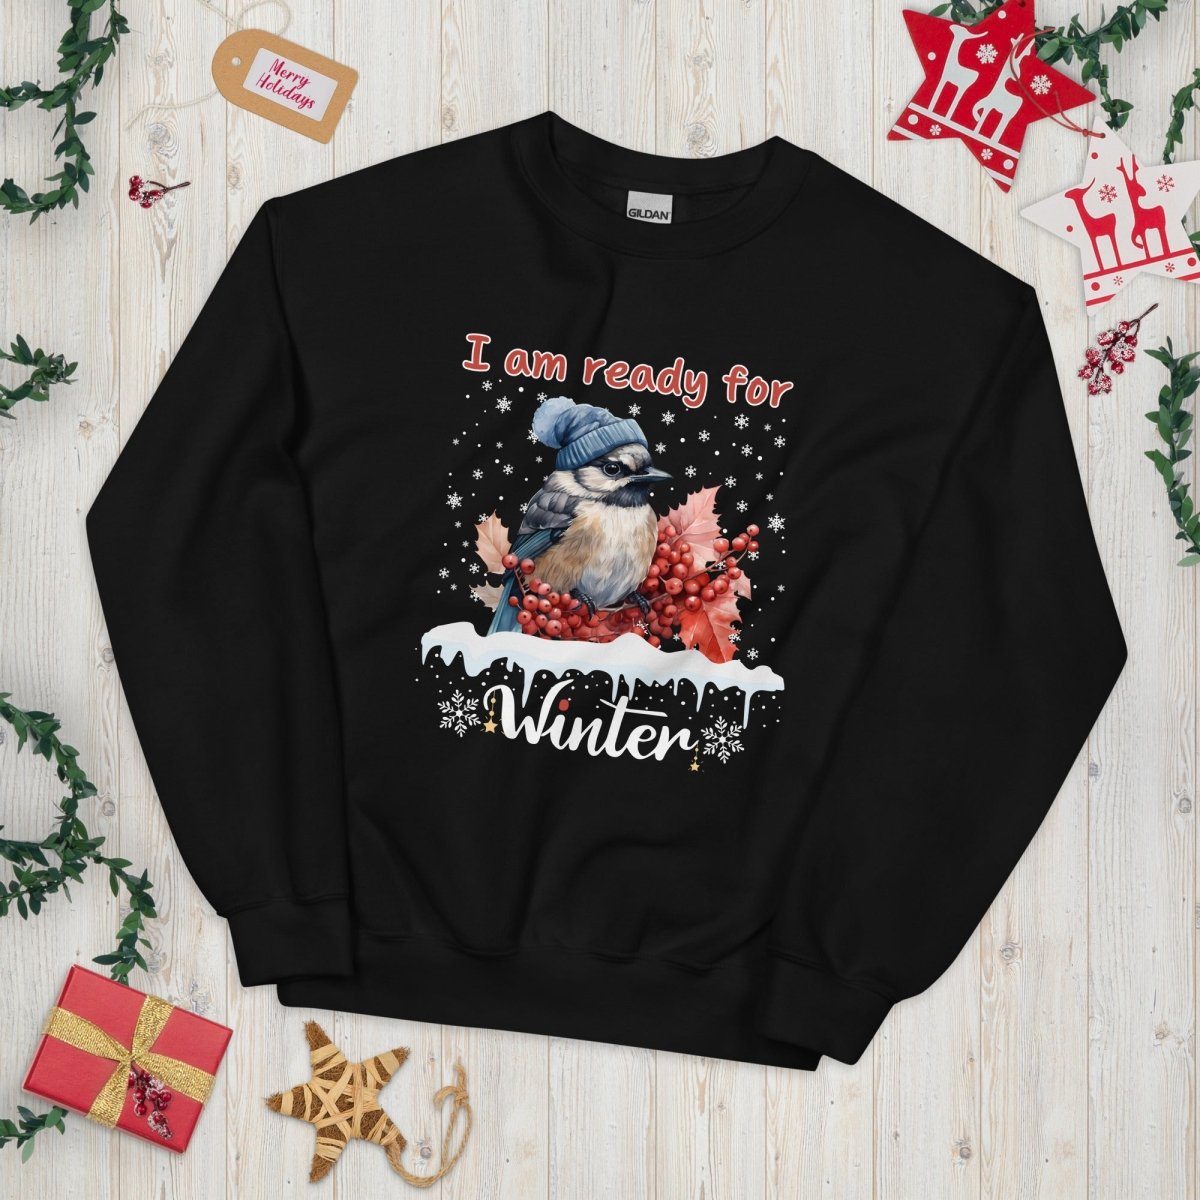 Ready for Winter Sweater - High Quality Funny Cute Bird Sweatshirt, Funny Gift for Bird Lover, Bird with Bobble Hat, Winter Season Pullover - Everything Pixel